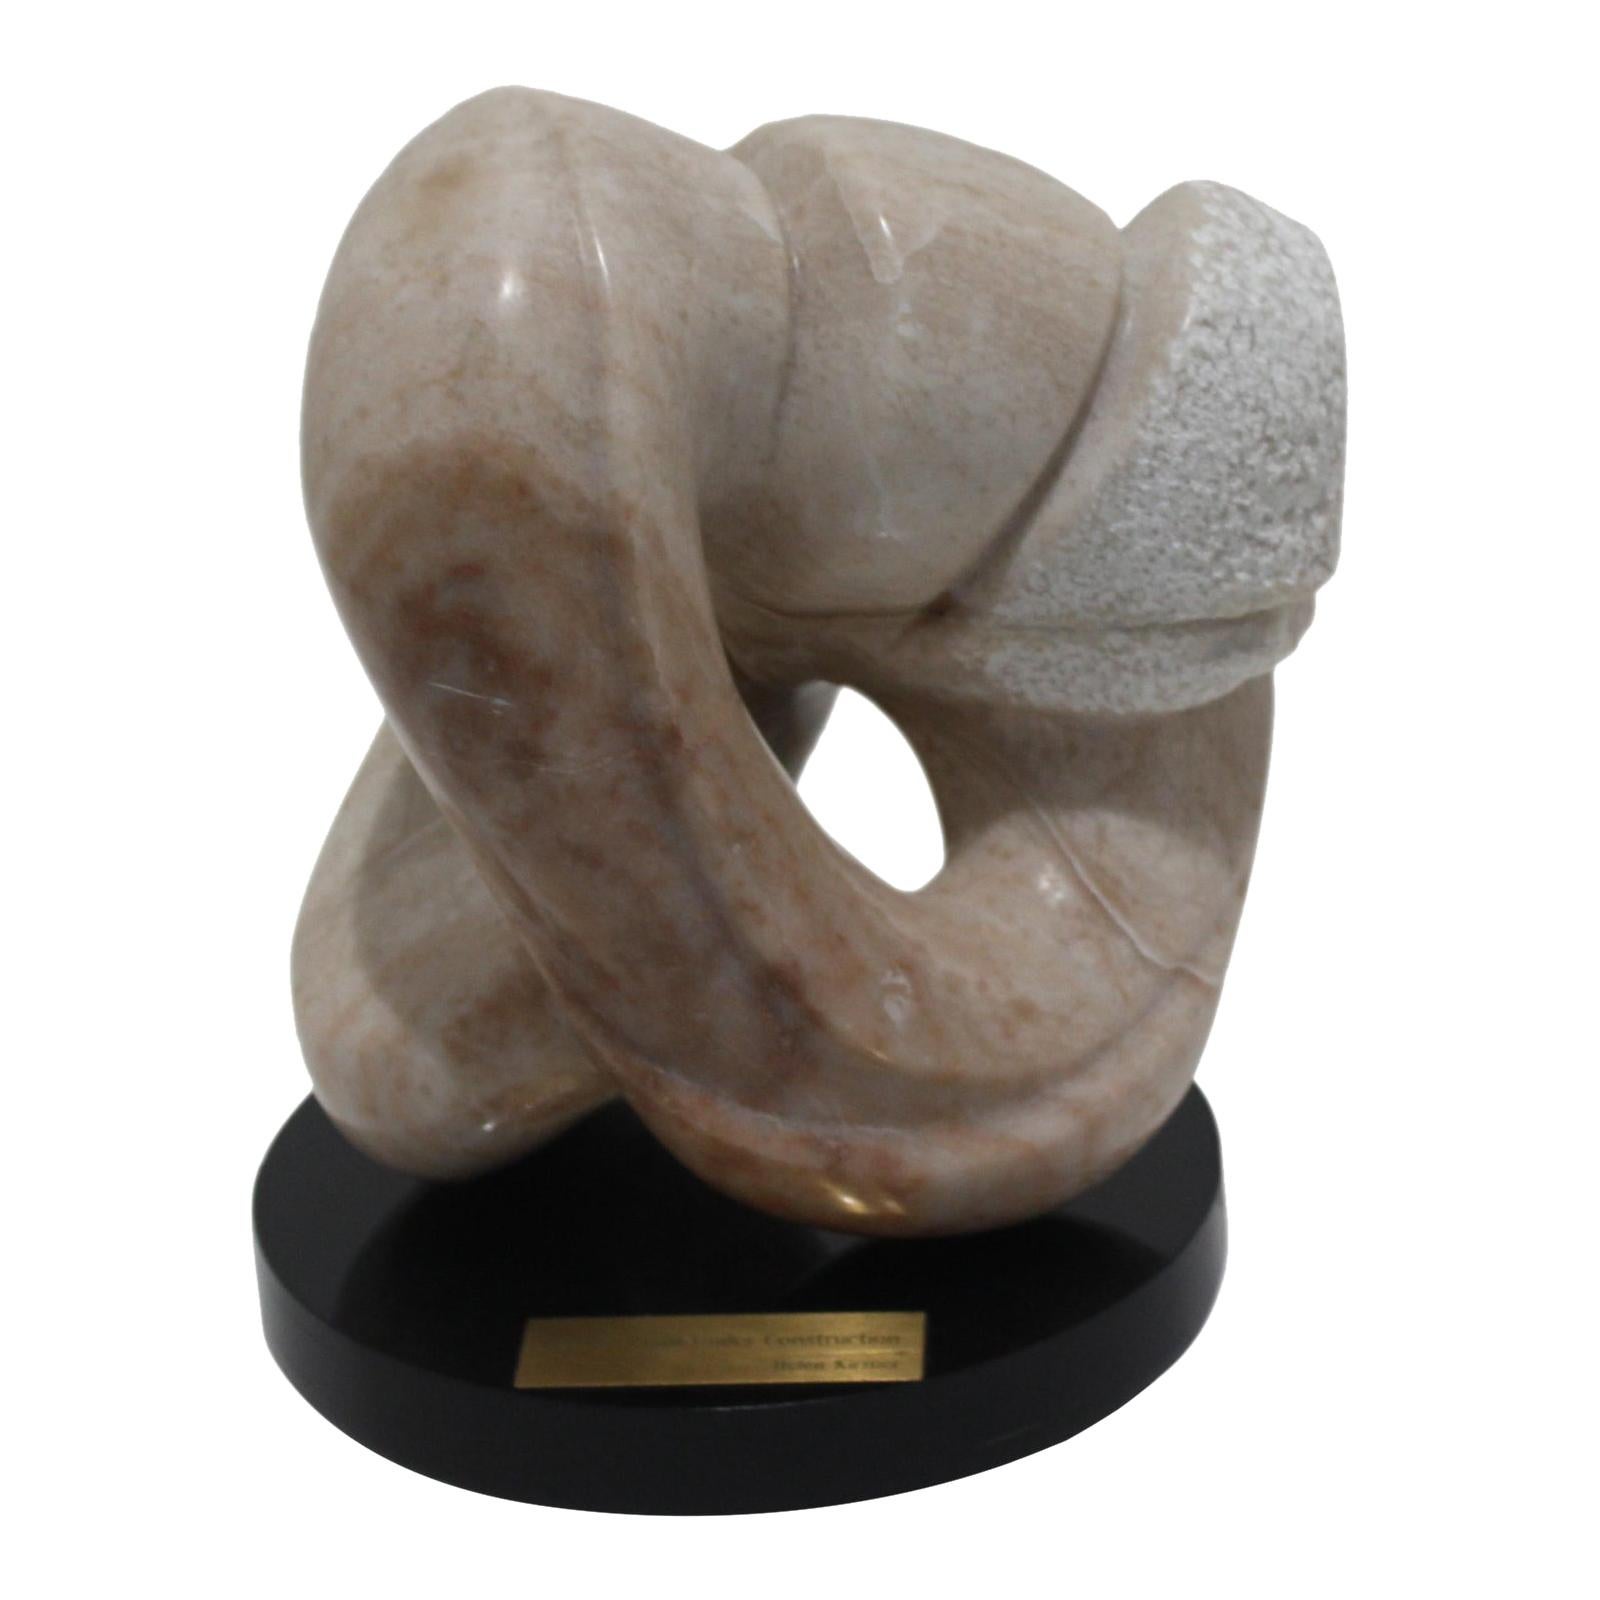 Abstract Marble and Granite Sculpture by Helen Kerzner